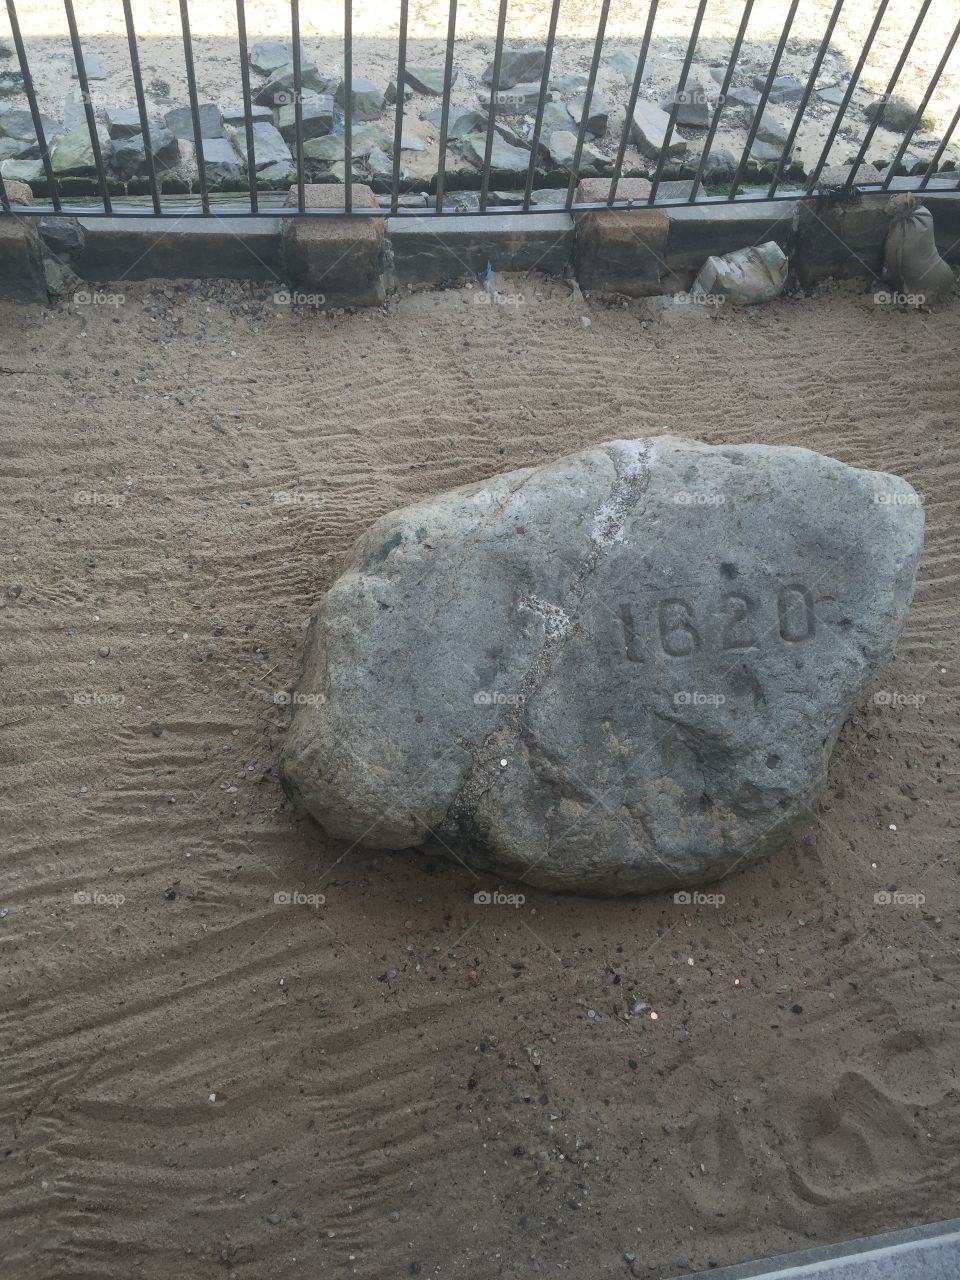 Another picture of Plymouth Rock